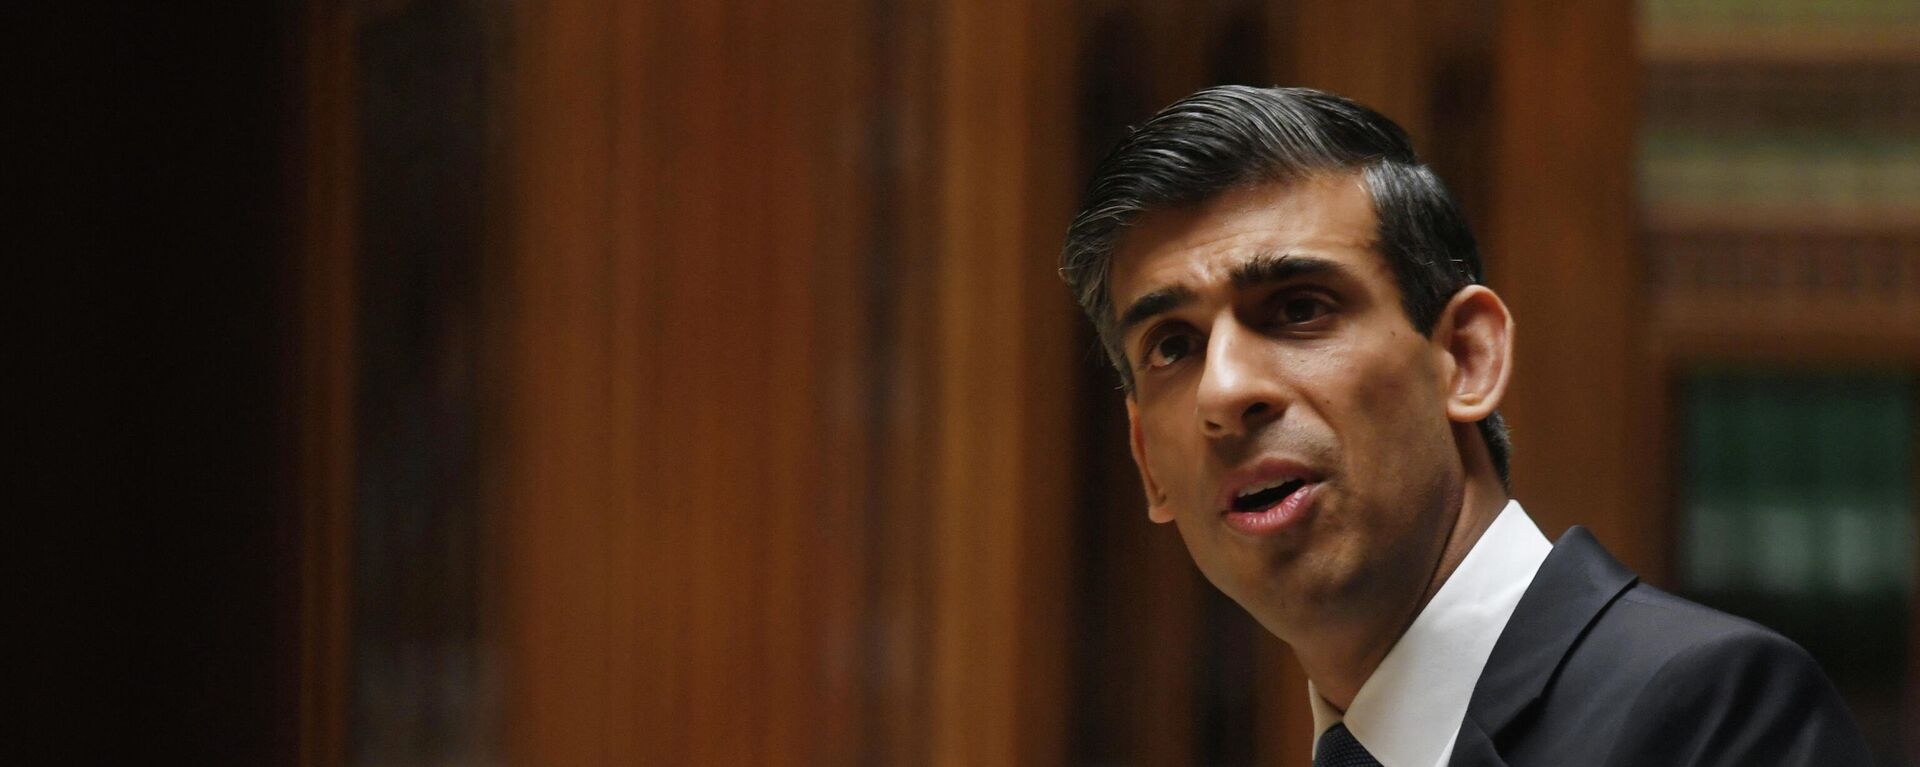 British Chancellor of the Exchequer Rishi Sunak delivers a statement on the economic update, at the House of Commons in London, Britain February 3, 2022 - Sputnik International, 1920, 05.02.2022